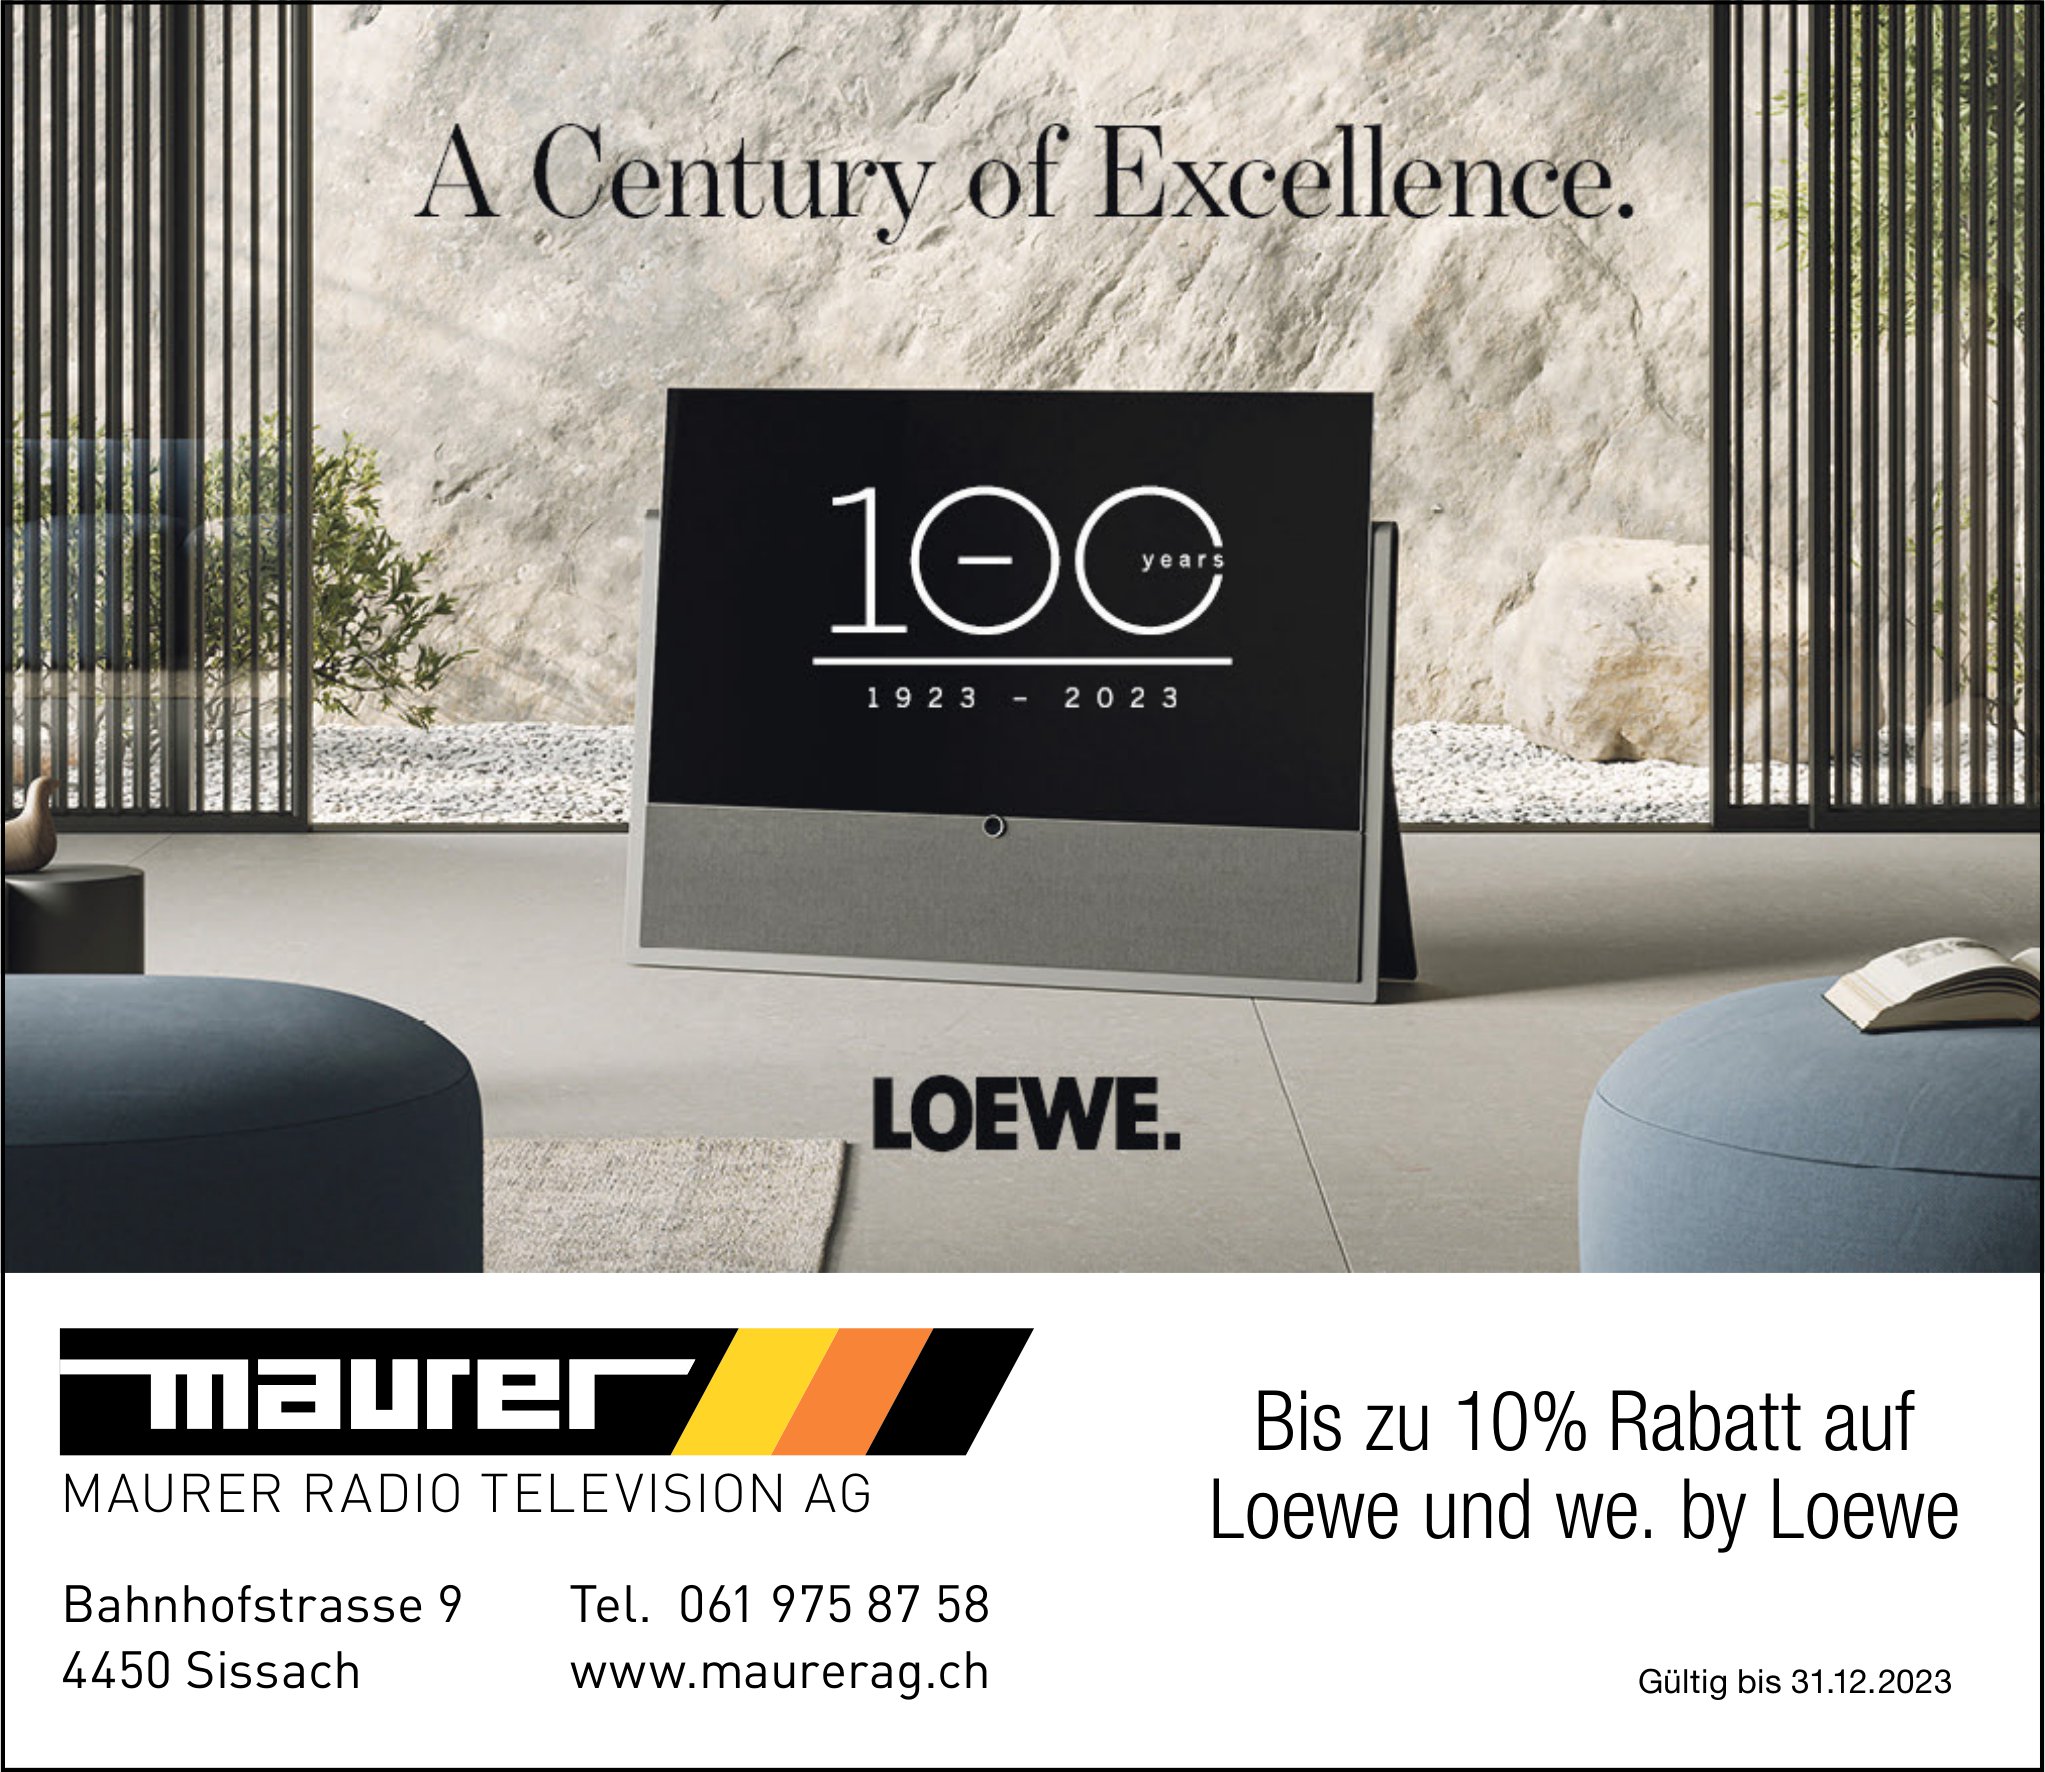 Maurer Radio Television AG, Sissach - A Century of Excellence